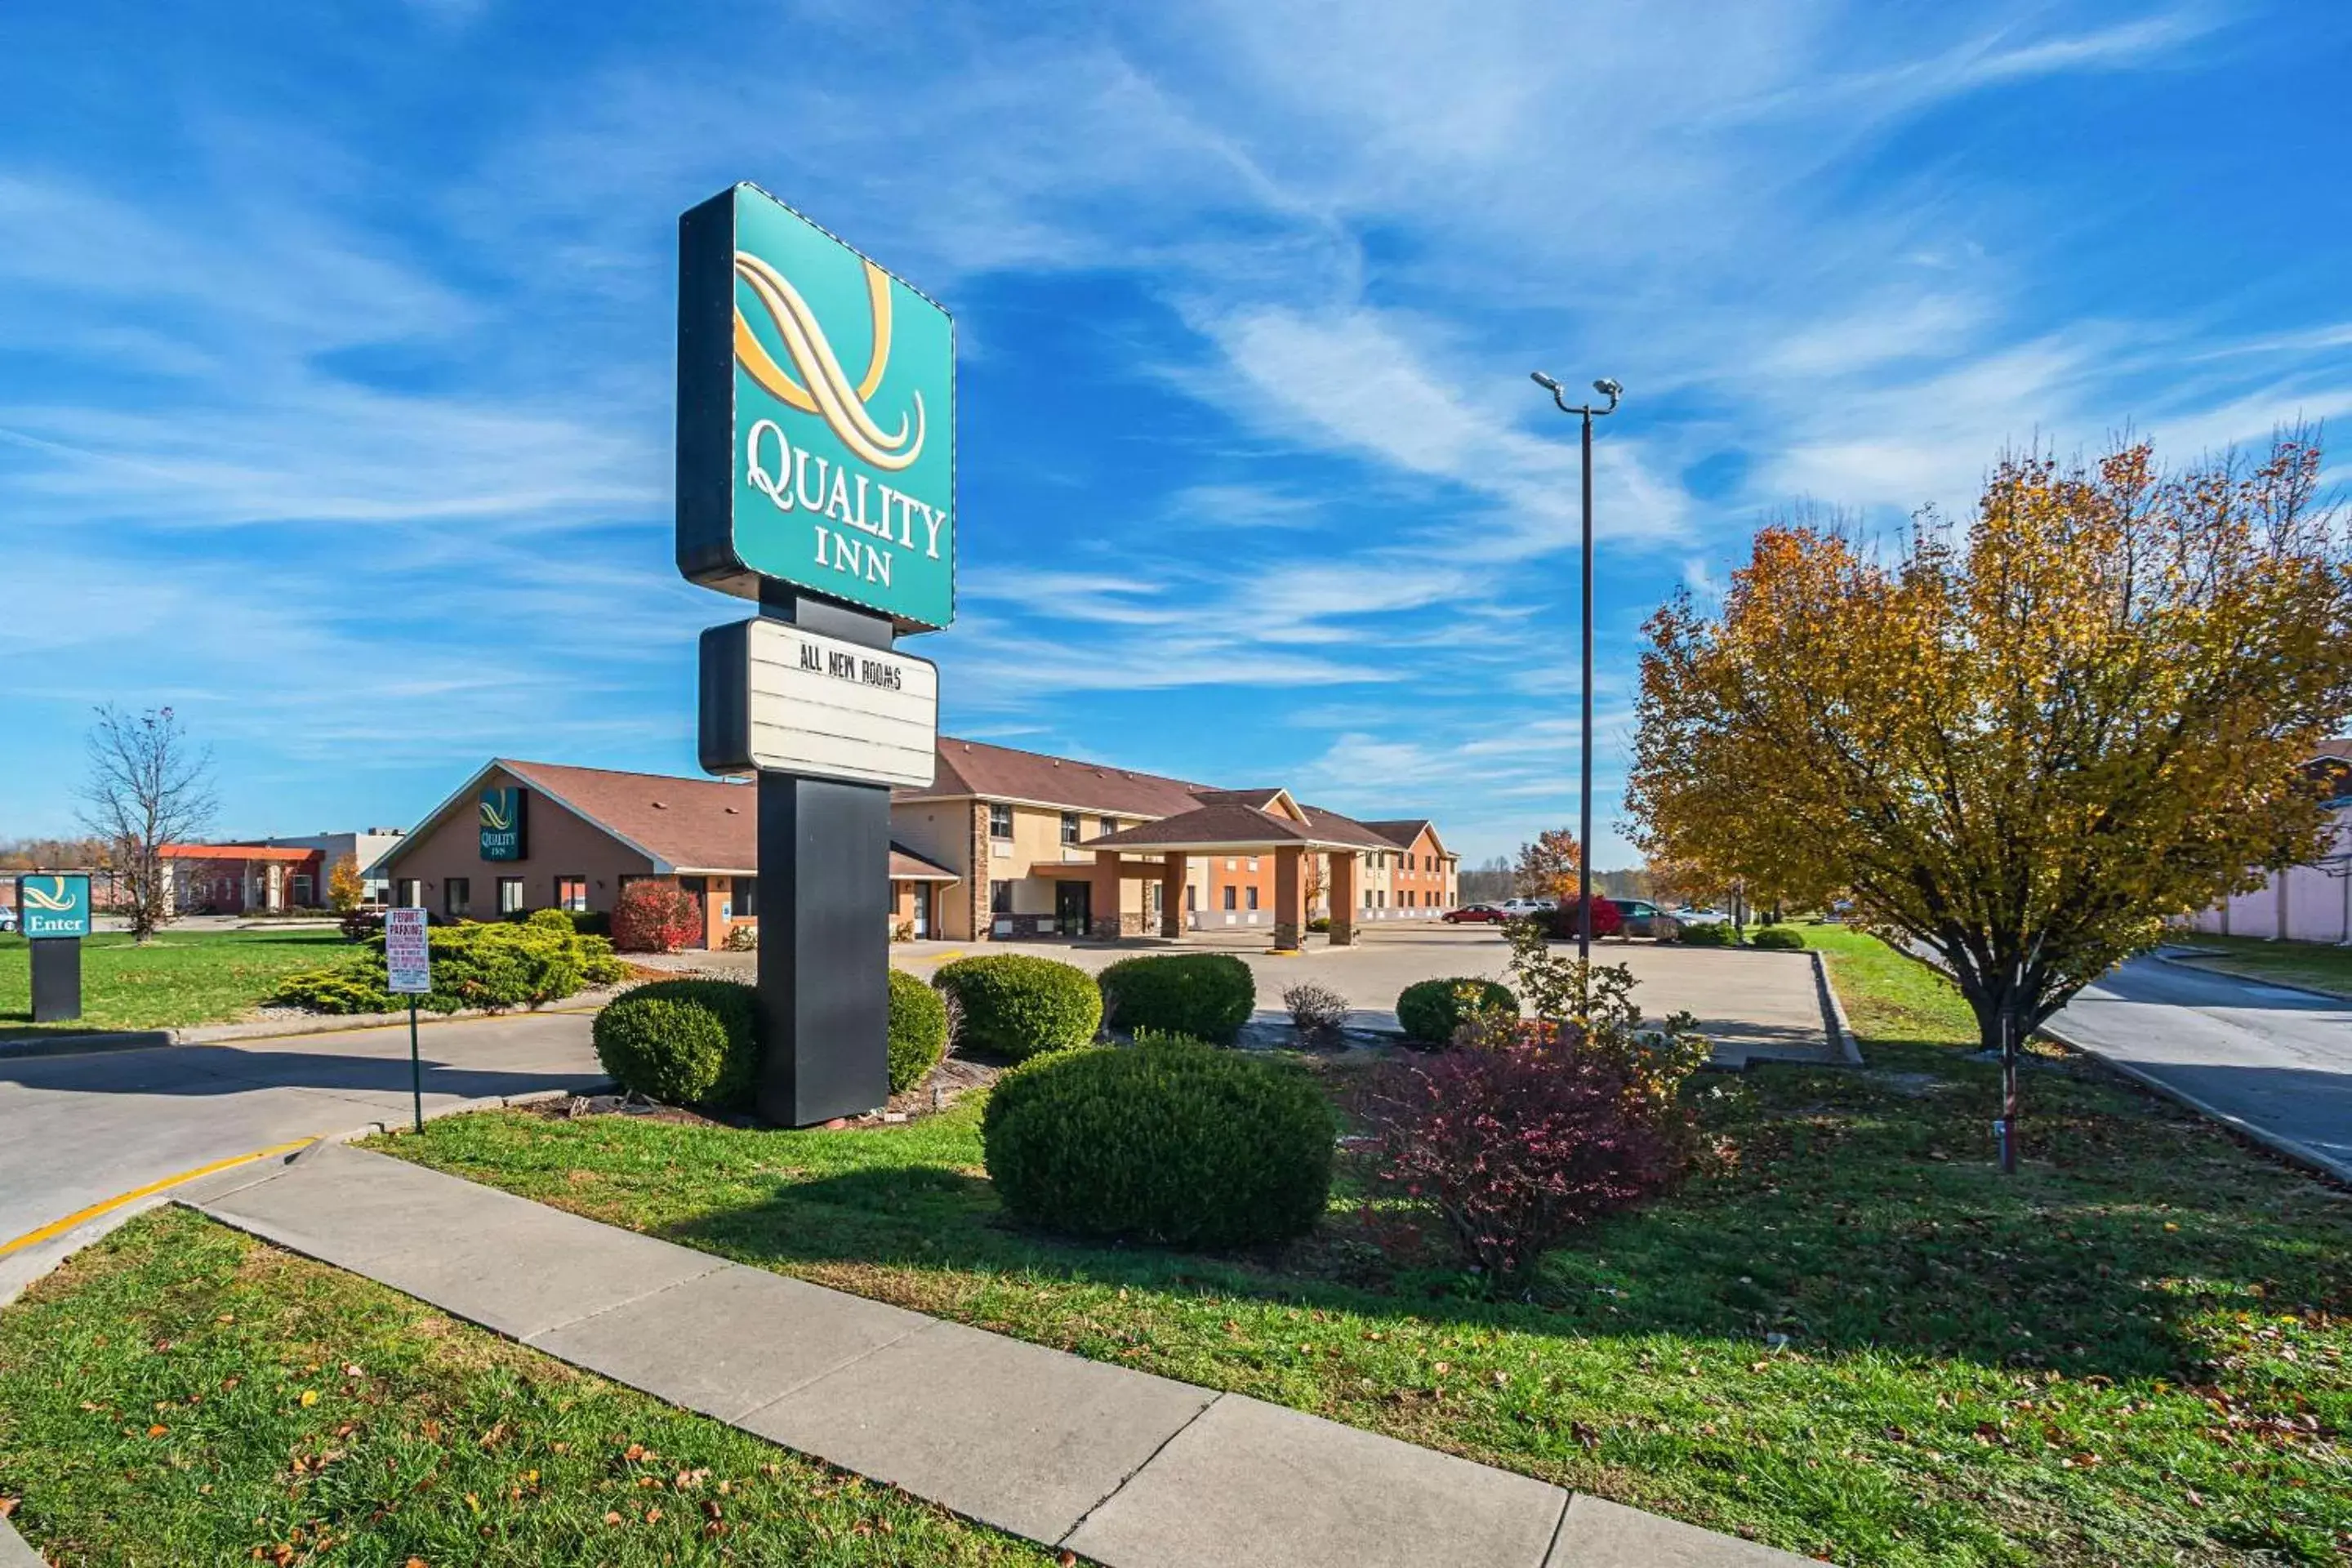 Property Building in Quality Inn Carbondale University area